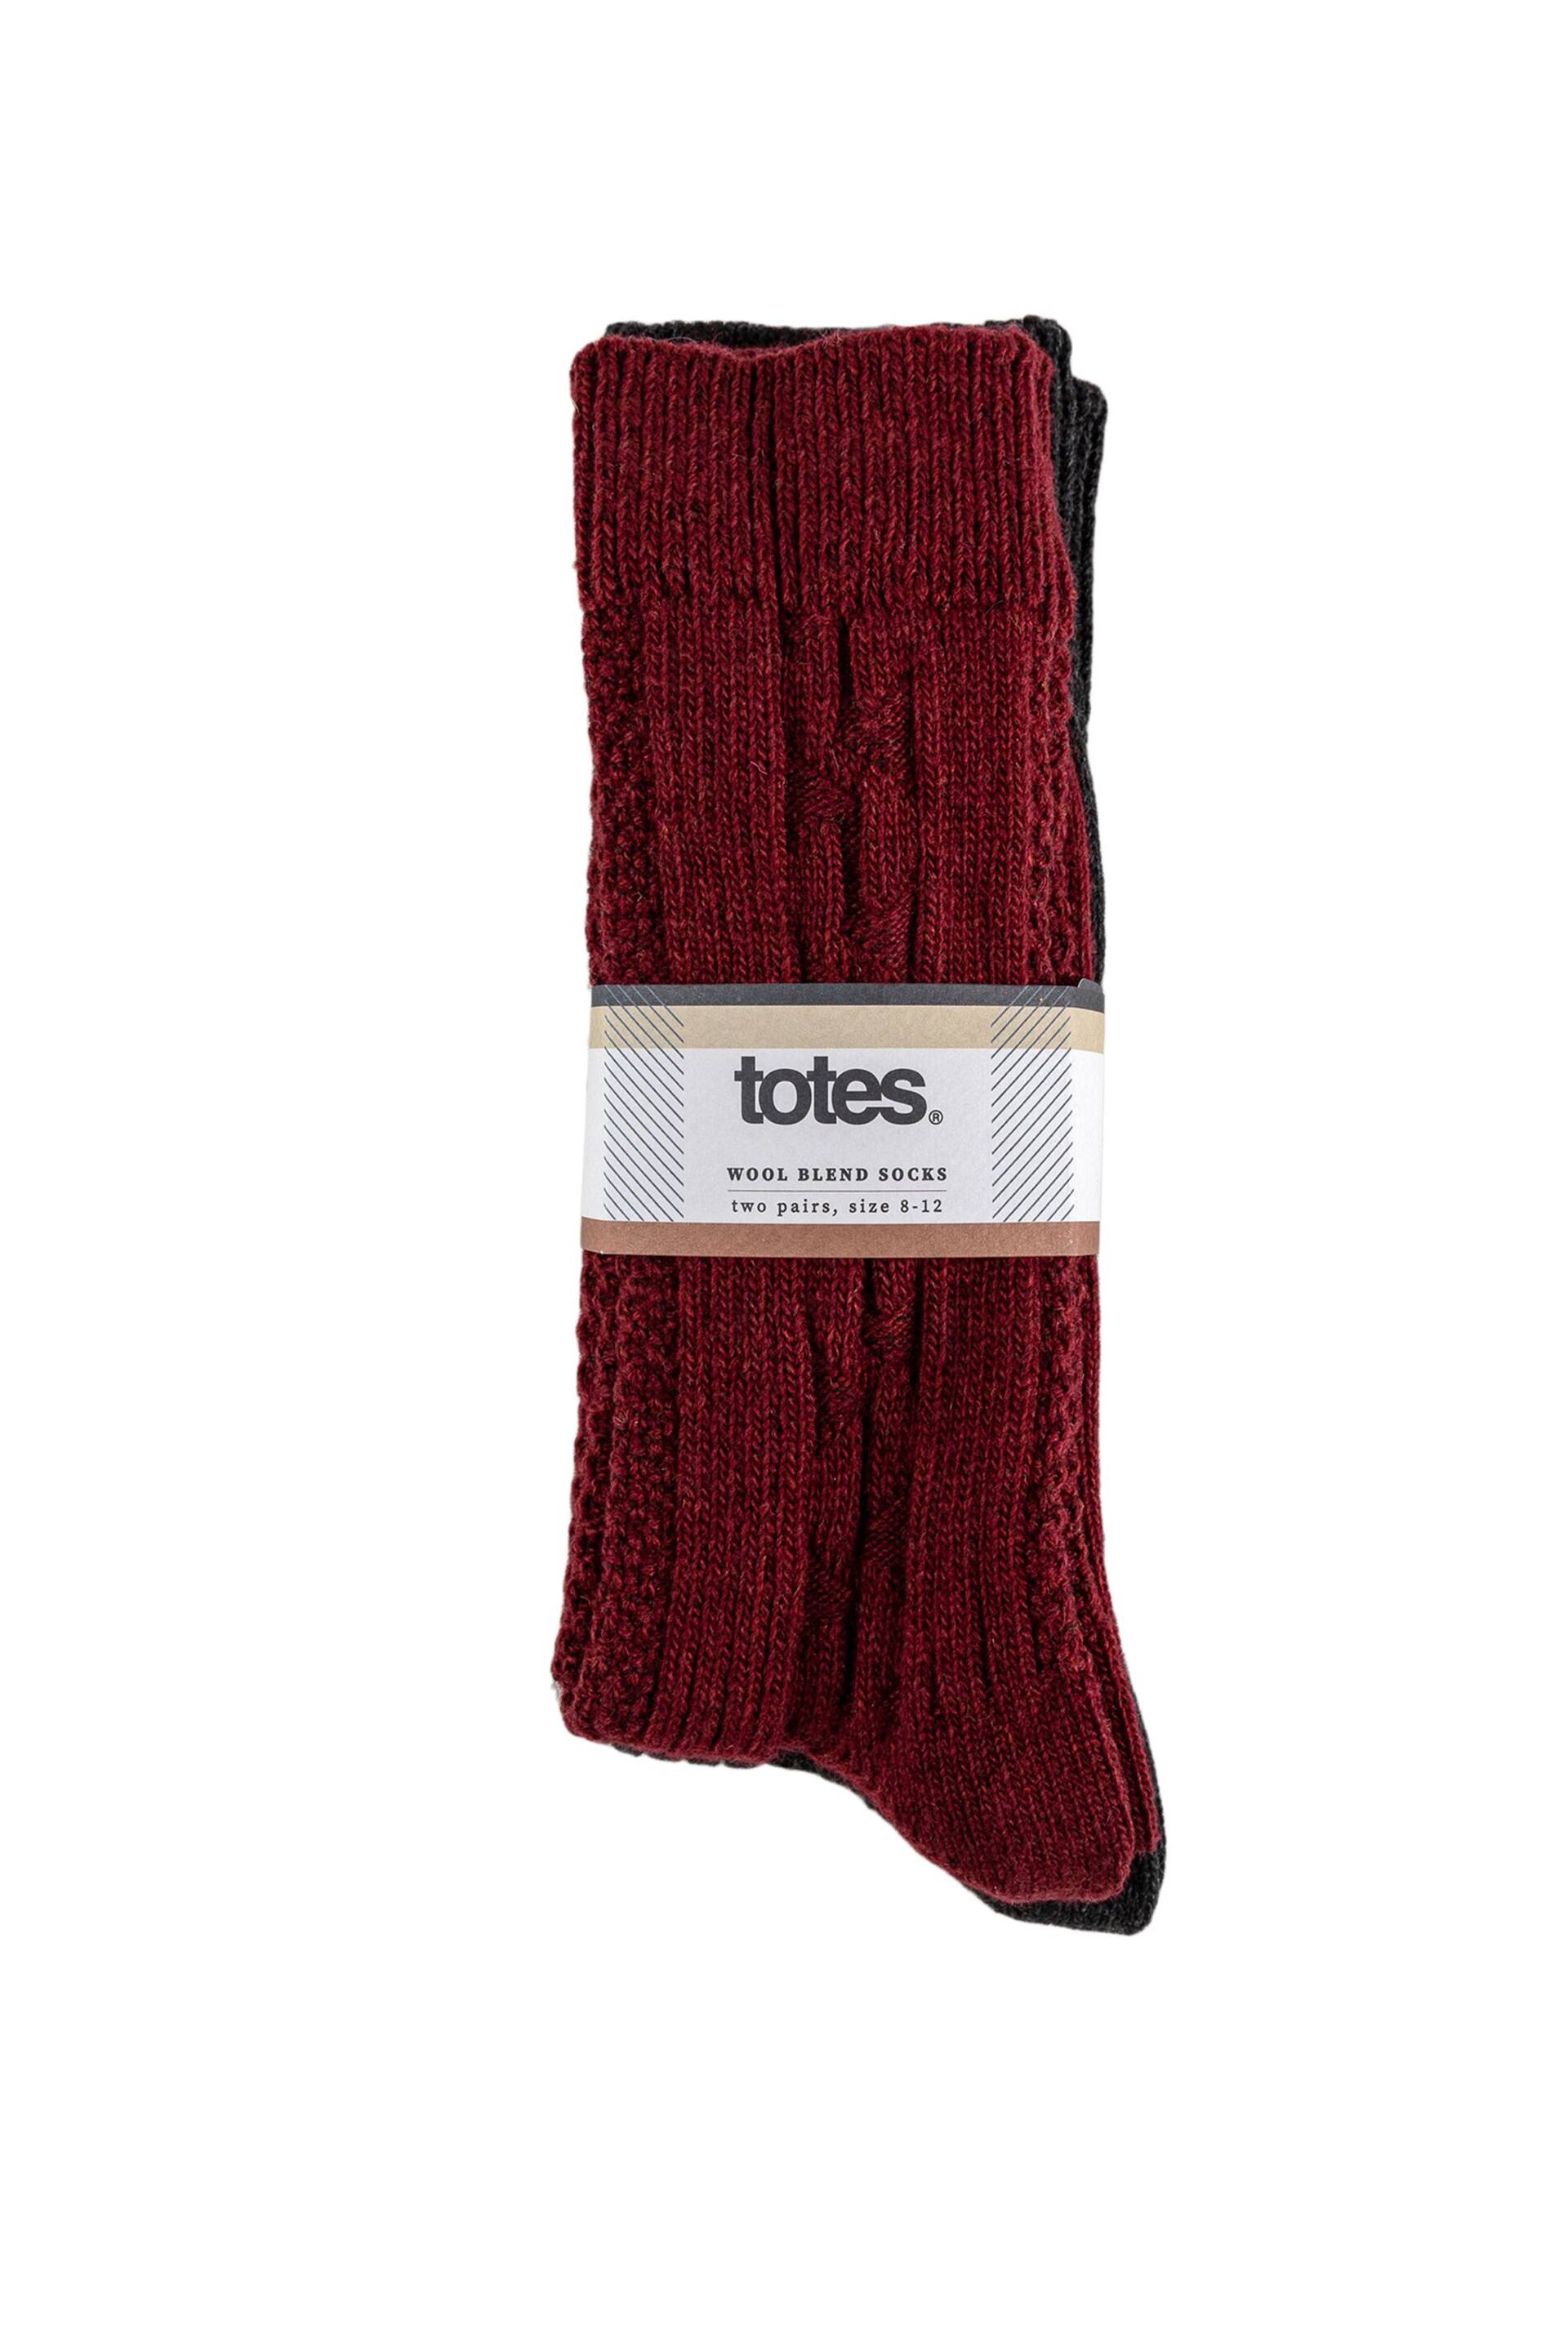 Totes Grey Twin Pack Thermal Wool Blend Socks - Image 2 of 5